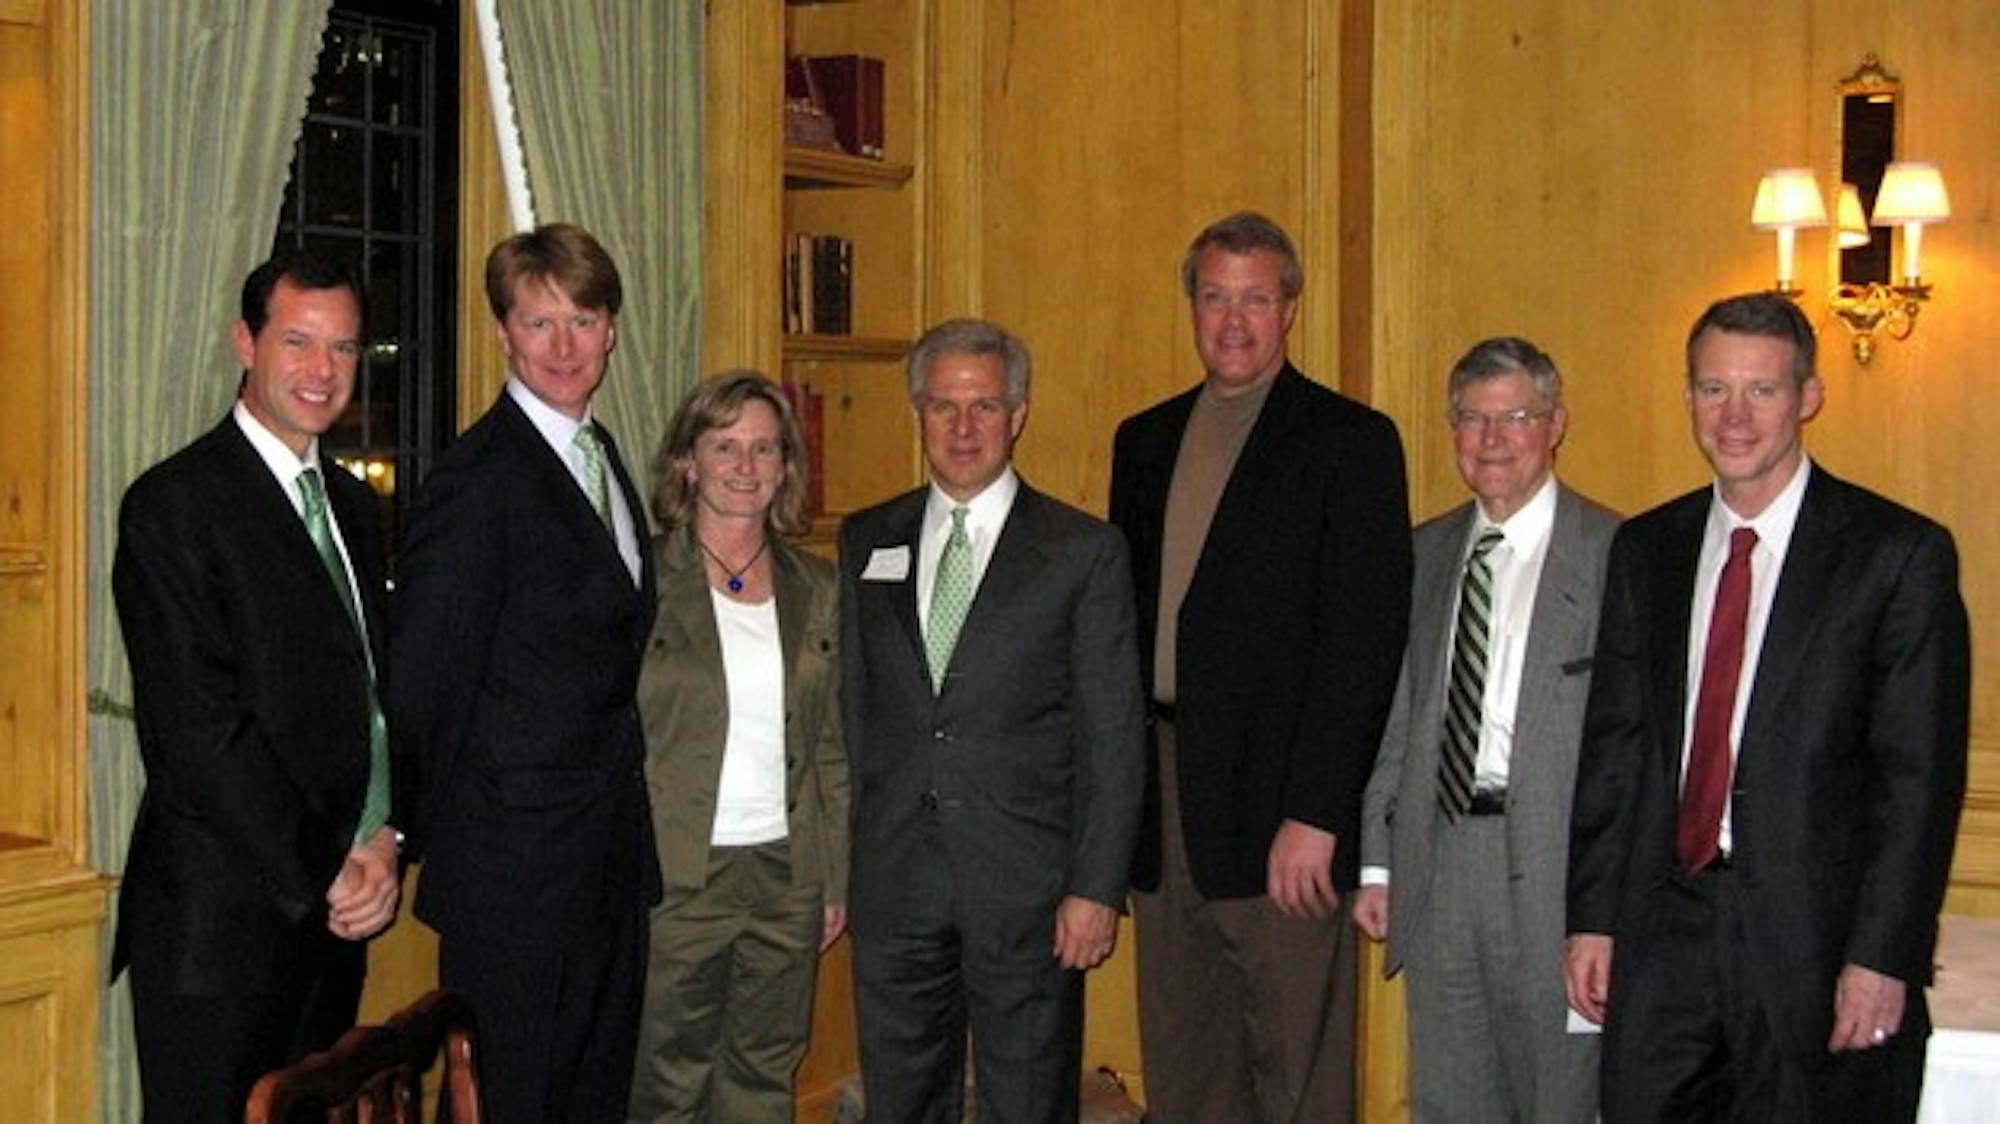 Trustee candidates John Replogle '88, second from left, Joe Asch '79, center, and Morton Kondracke '60, second from right, stand with alumni at an event held in Minneapolis on Tuesday night. 